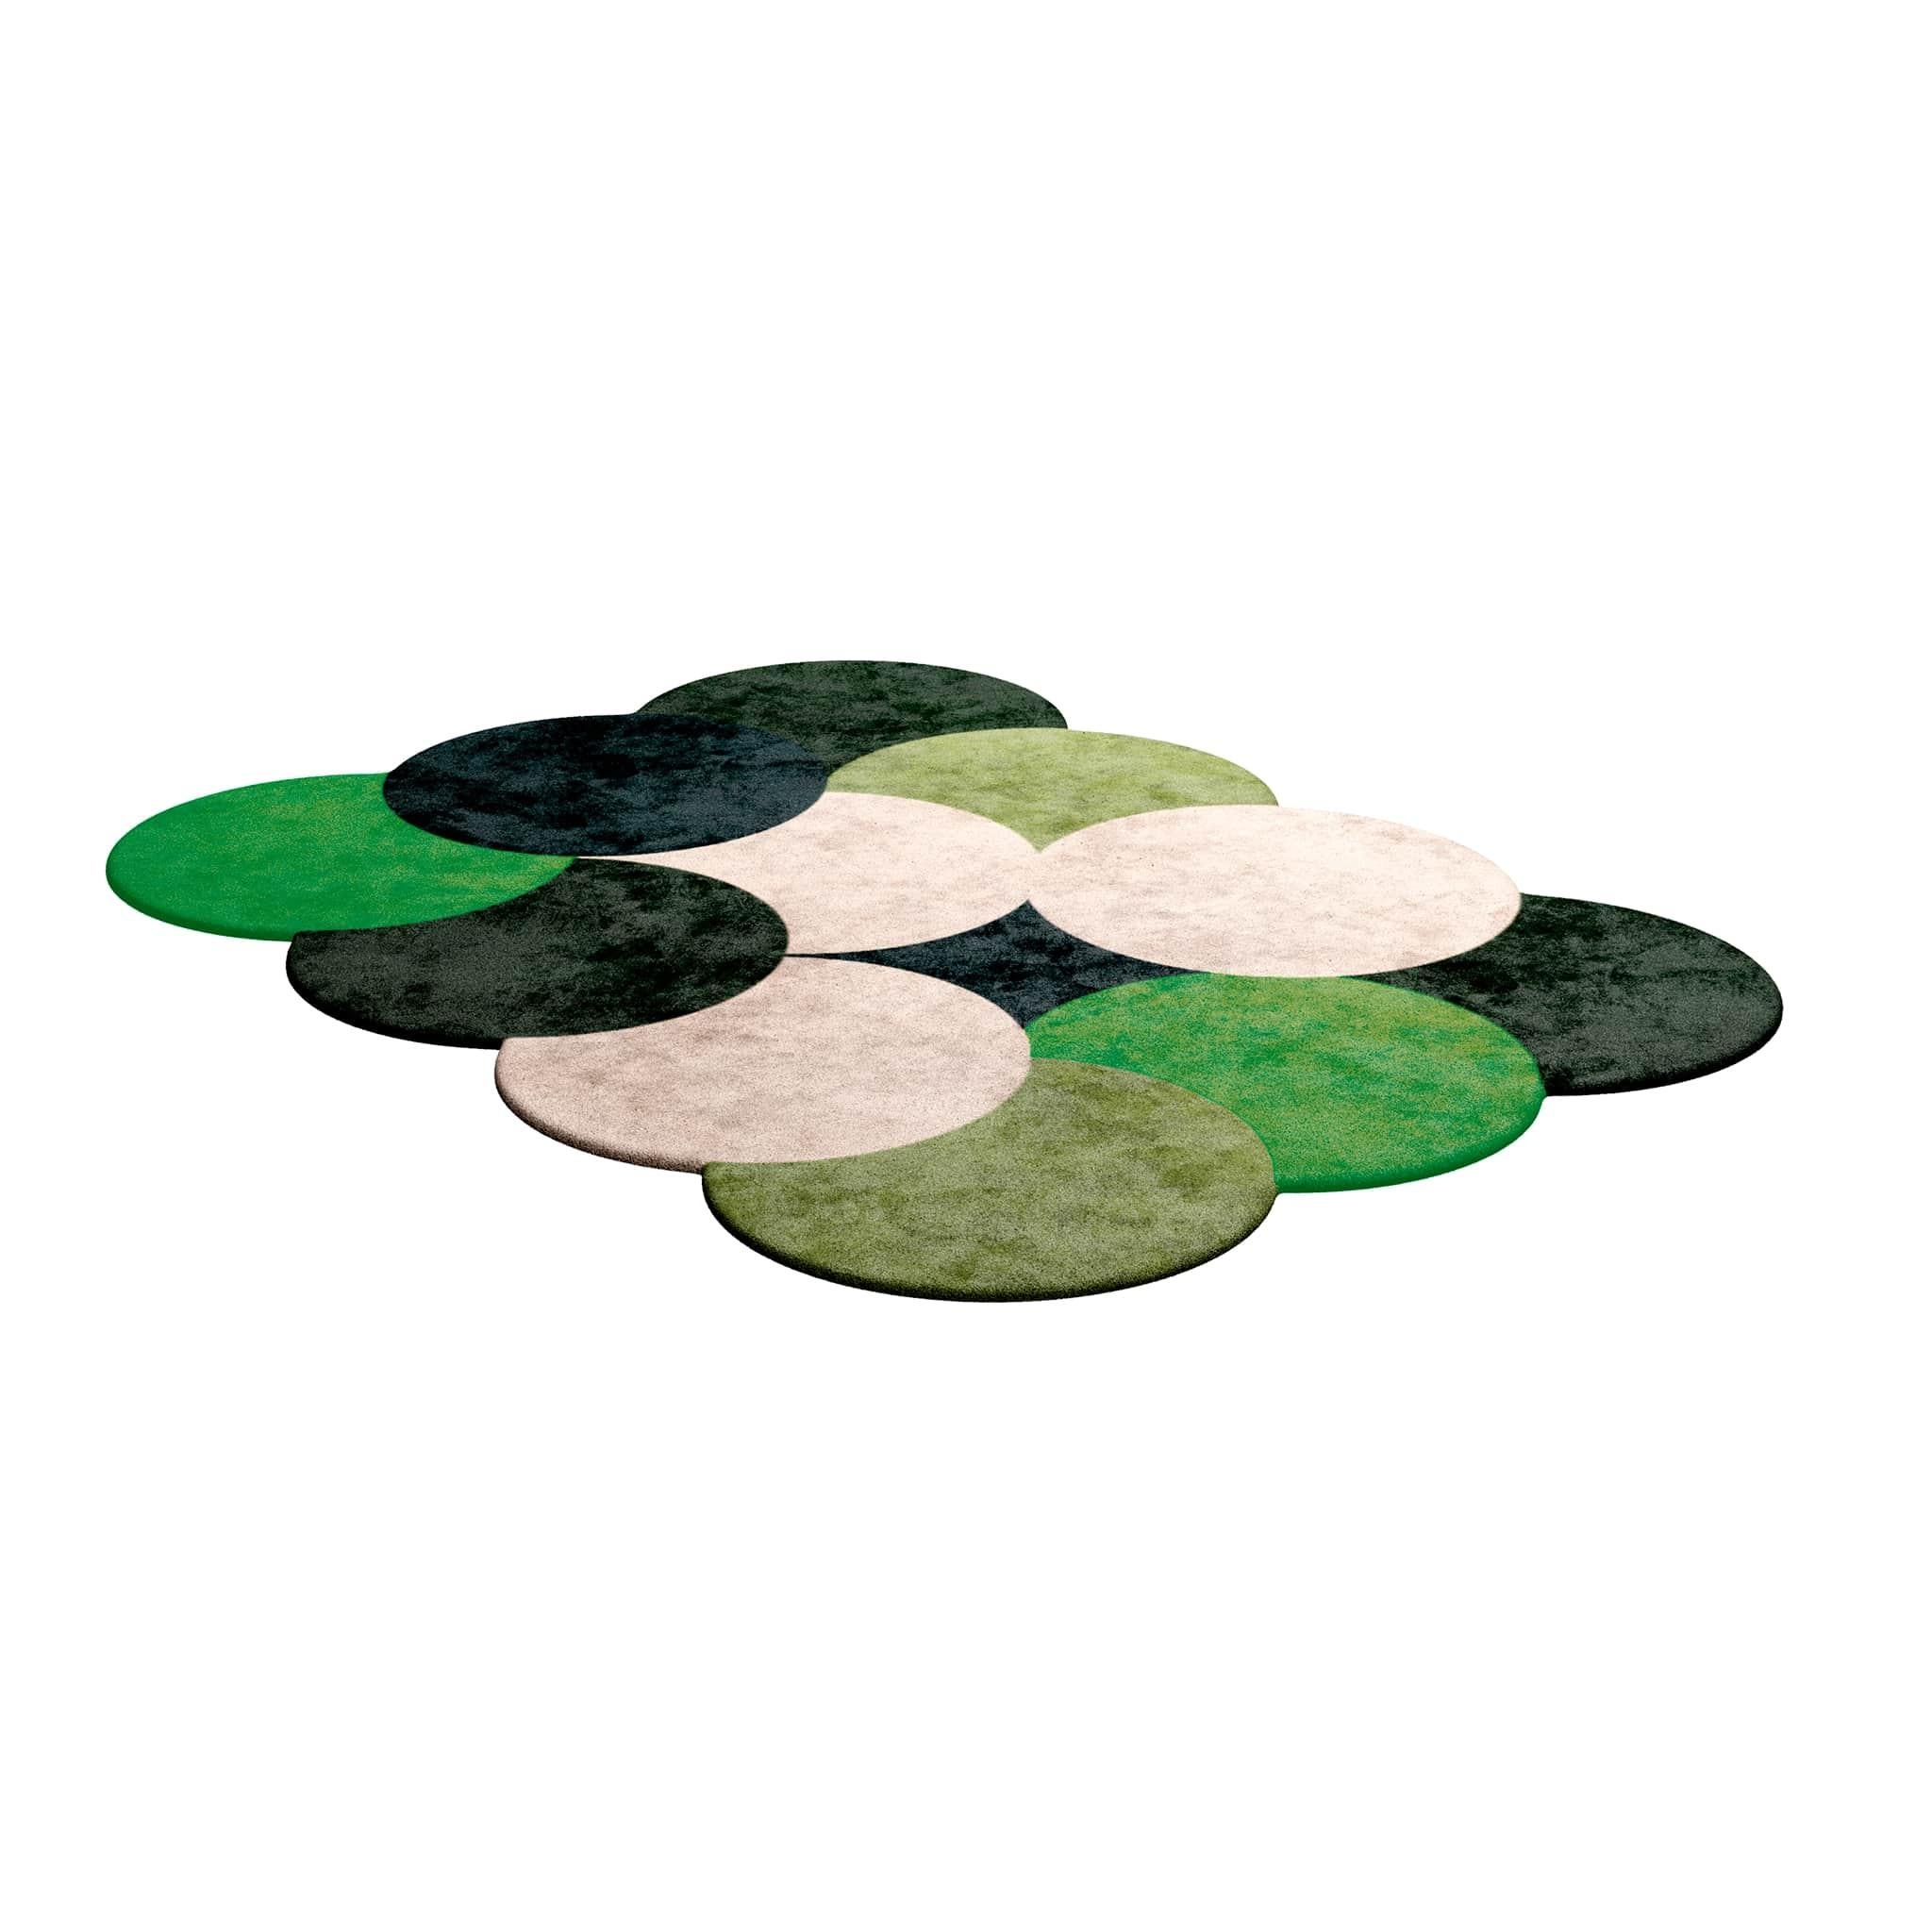 Modern Memphis Style Rectangular Hand-Tufted Circle Patterned Rug Green 
Tapis Shaped #050 is a green rug part of a collection of trendy rugs with modern flair for timeless interiors.
With a whimsical palette of trendy hues, the modern green rug